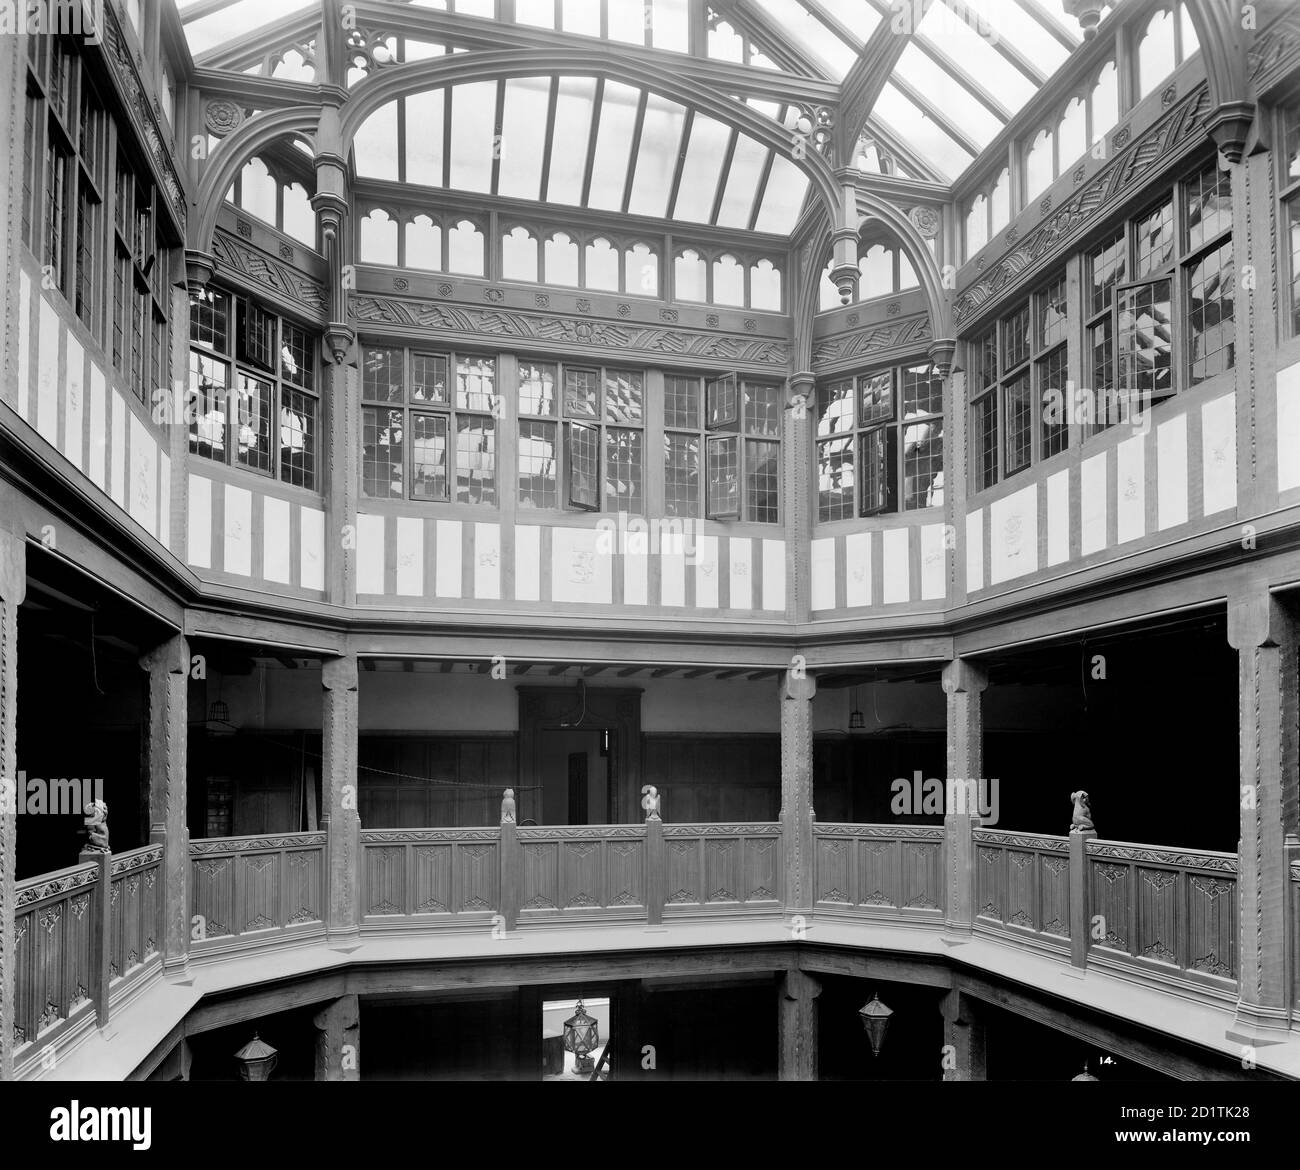 LIBERTY'S, Regent Street, London. Interior of Liberty's newly completed Arts and Crafts Tudor style department store, showing the gallery and light well. This extraordinary building was constructed in 1922-24 using timbers from HMS Hindustan and HMS Impregnable. It was a remarkable reaction to the early twentieth century vogue for stone dressed steel-framed buildings. Designed by Edwin T. Hall and E. Stanley Hall. This photograph was commissioned by Higgs and Hill, builders. Photographed by Bedford Lemere and Co. in 1924. Stock Photo